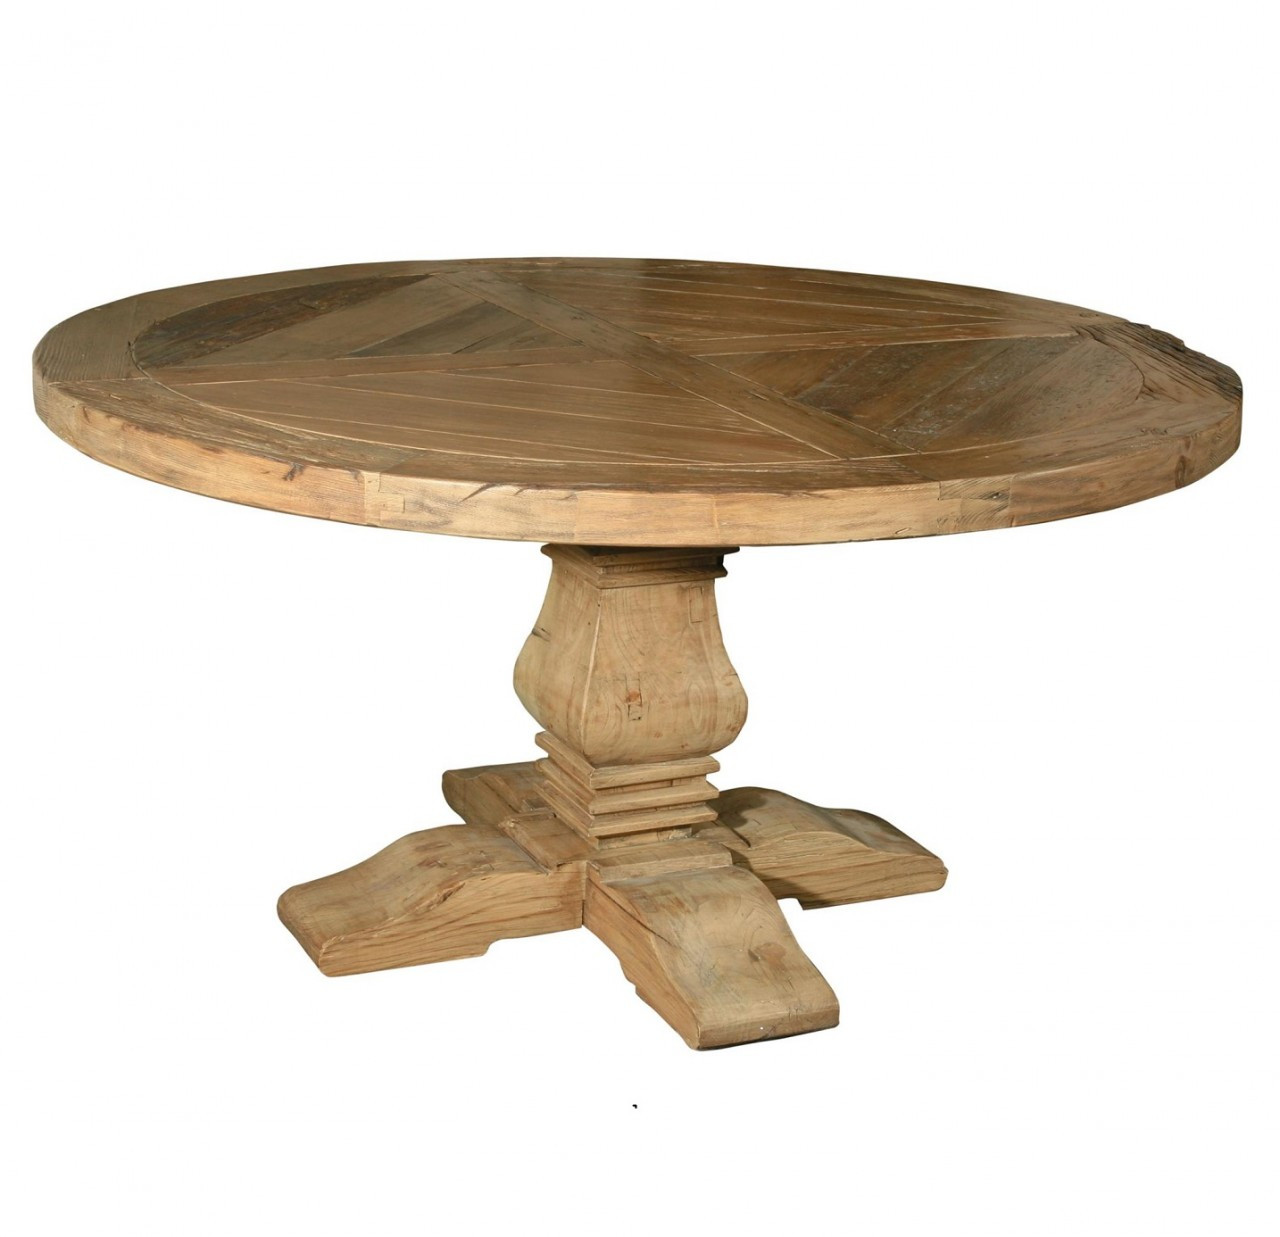 Pedestal 60" Round Dining Table | Reclaimed Wood Round ...